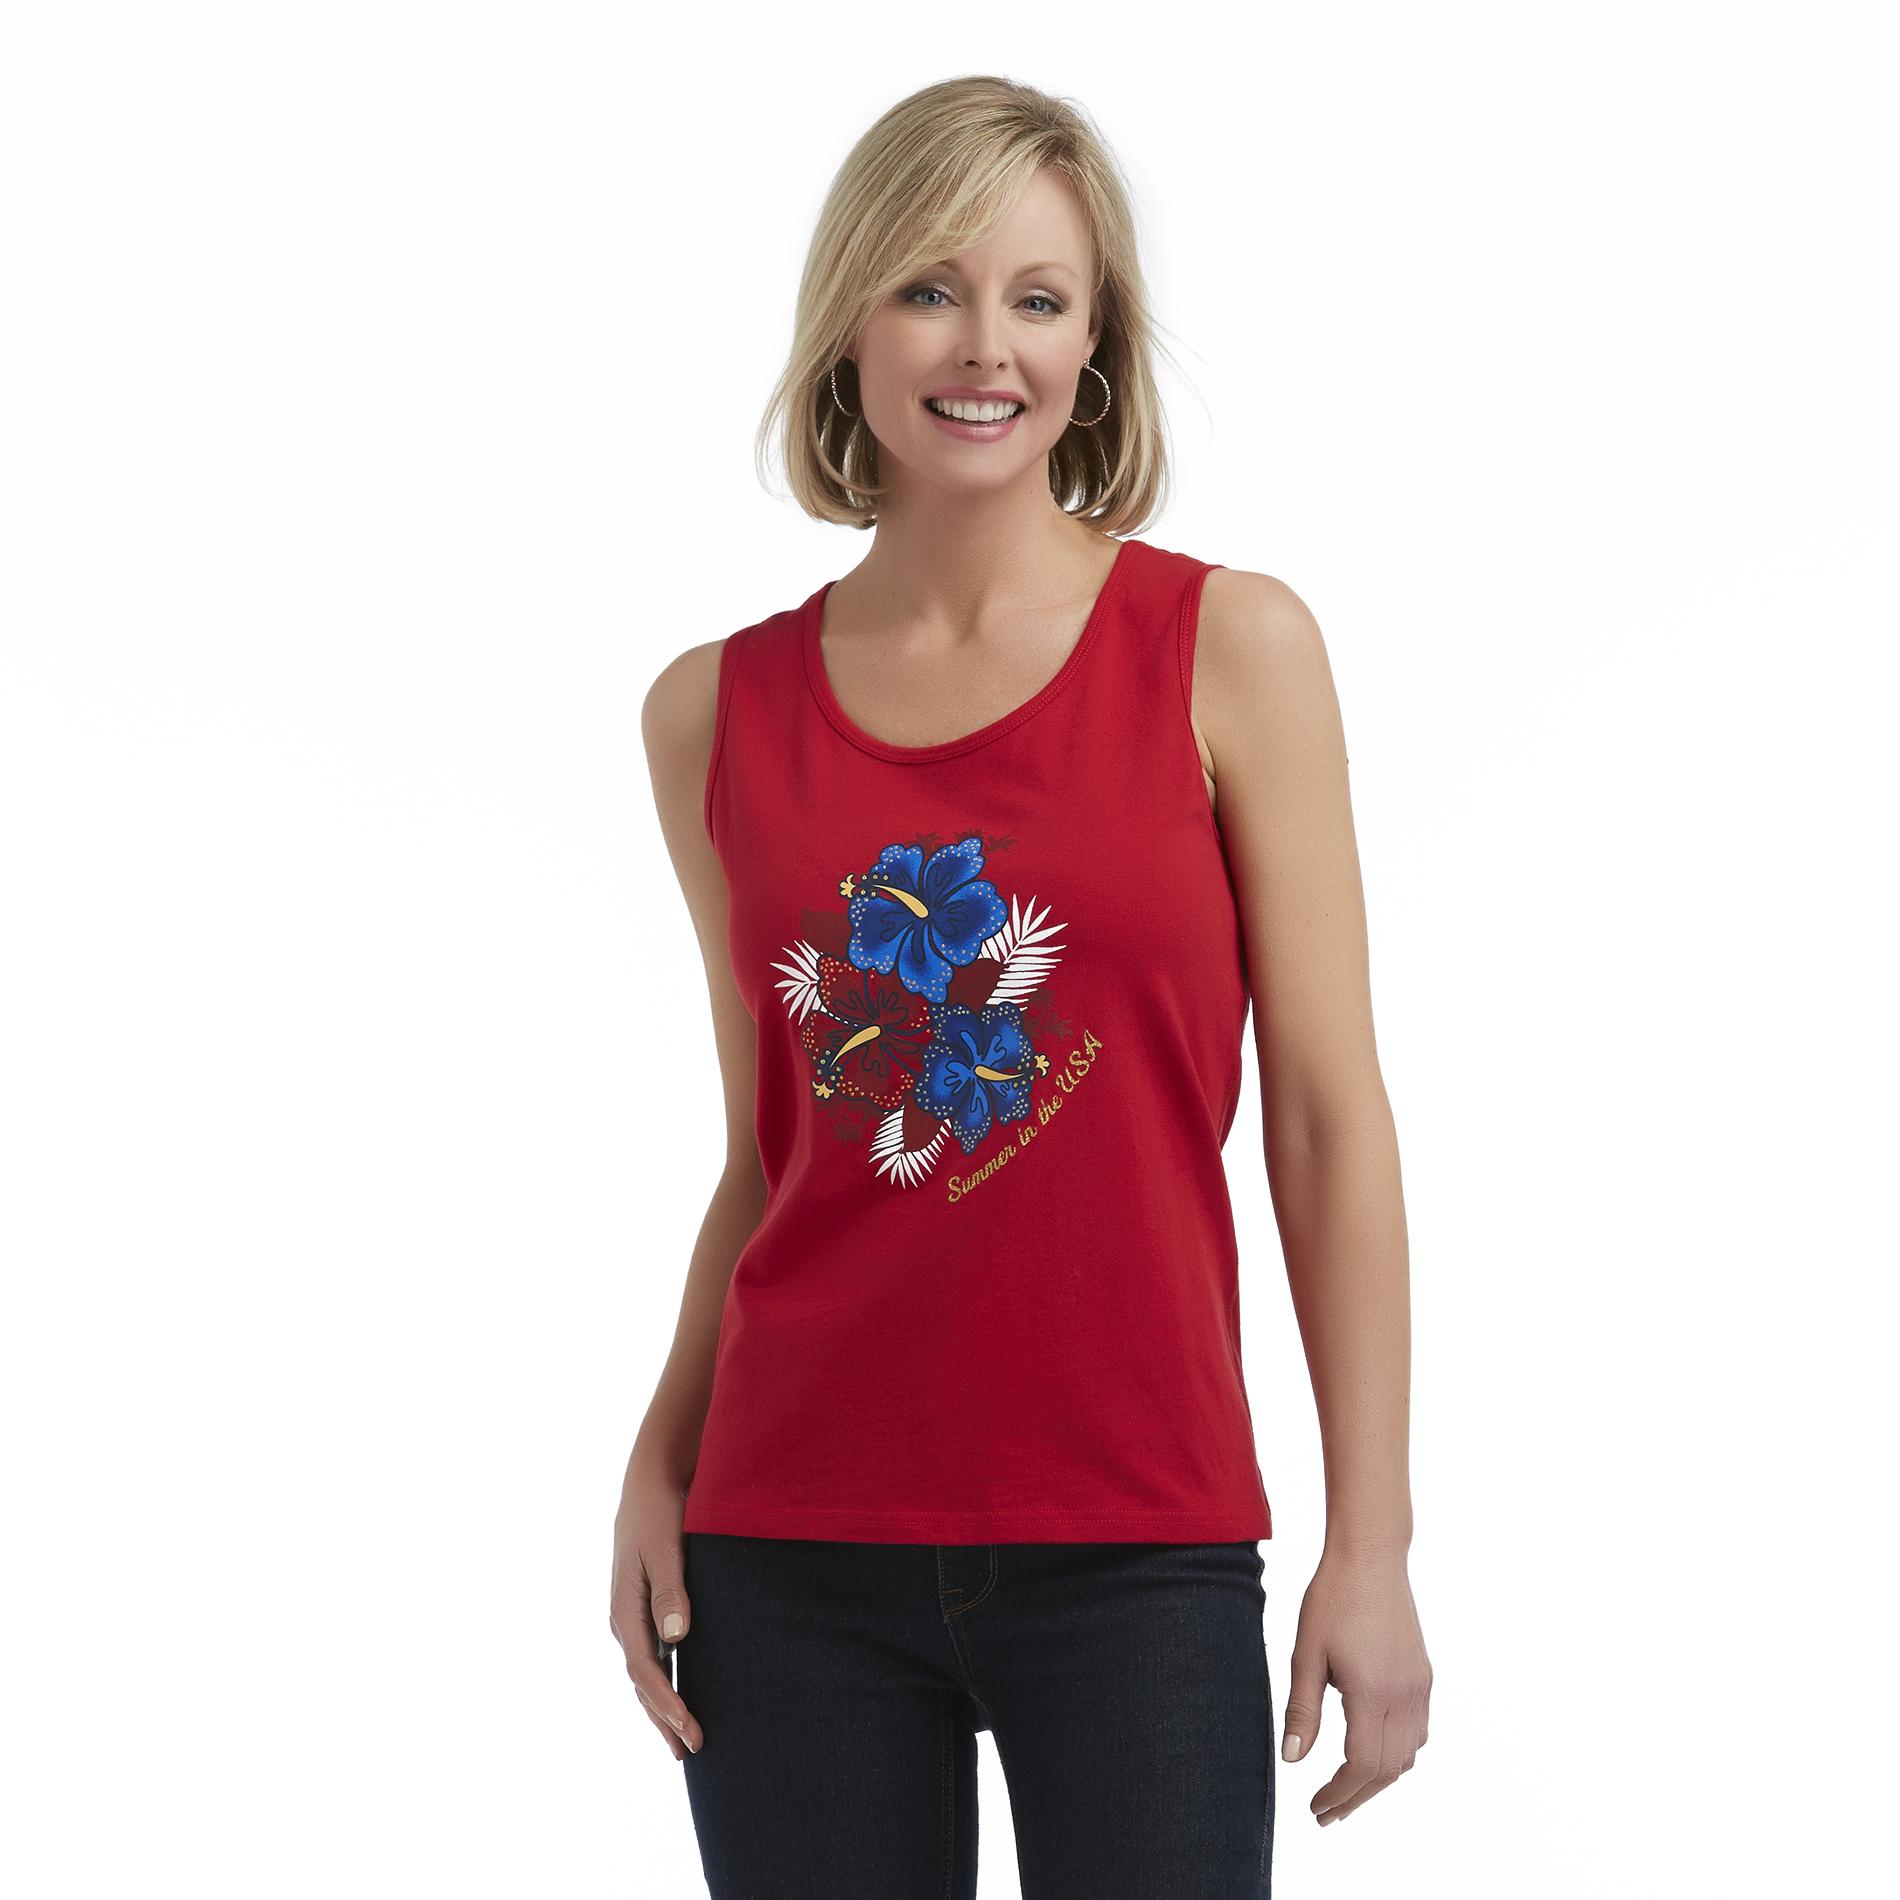 Holiday Editions Women's Graphic Tank Top - Americana